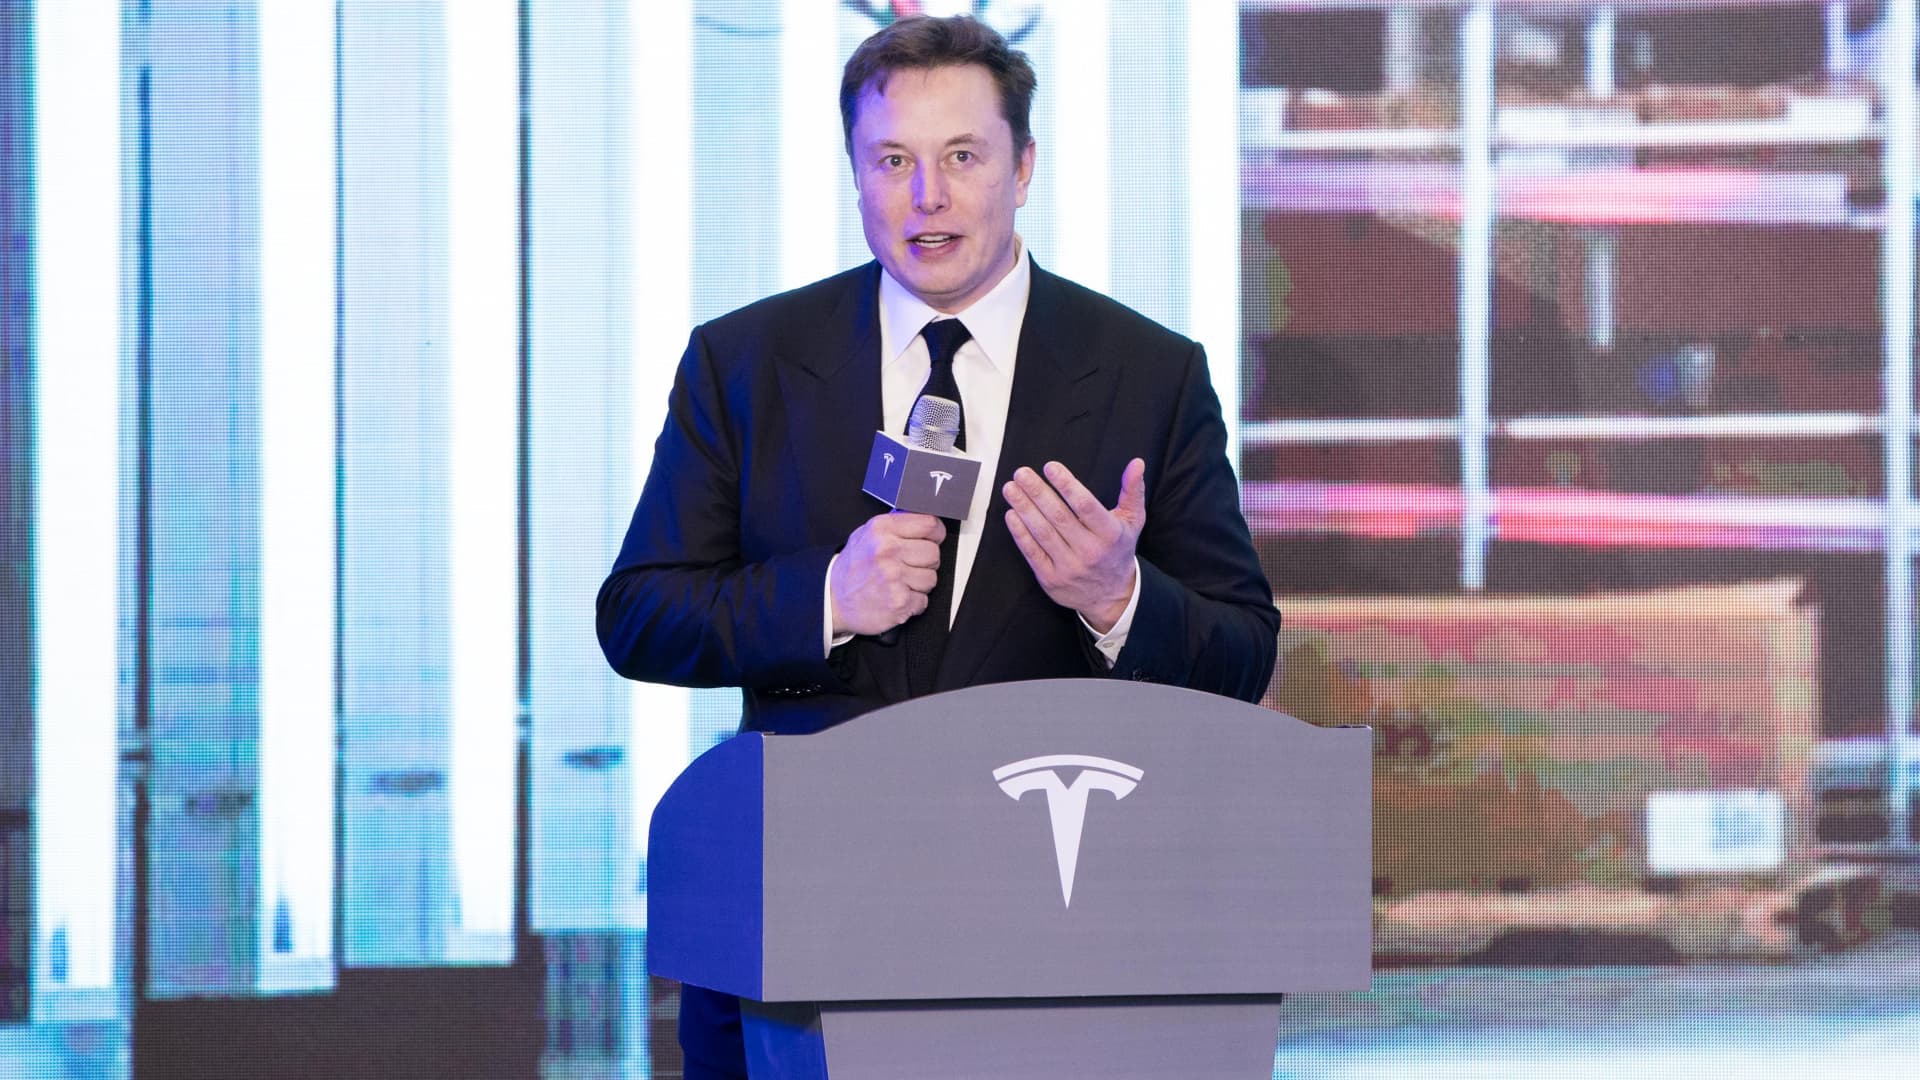 Elon Musk says a Chinese automaker will likely be second to Tesla: 'They work the smartest'